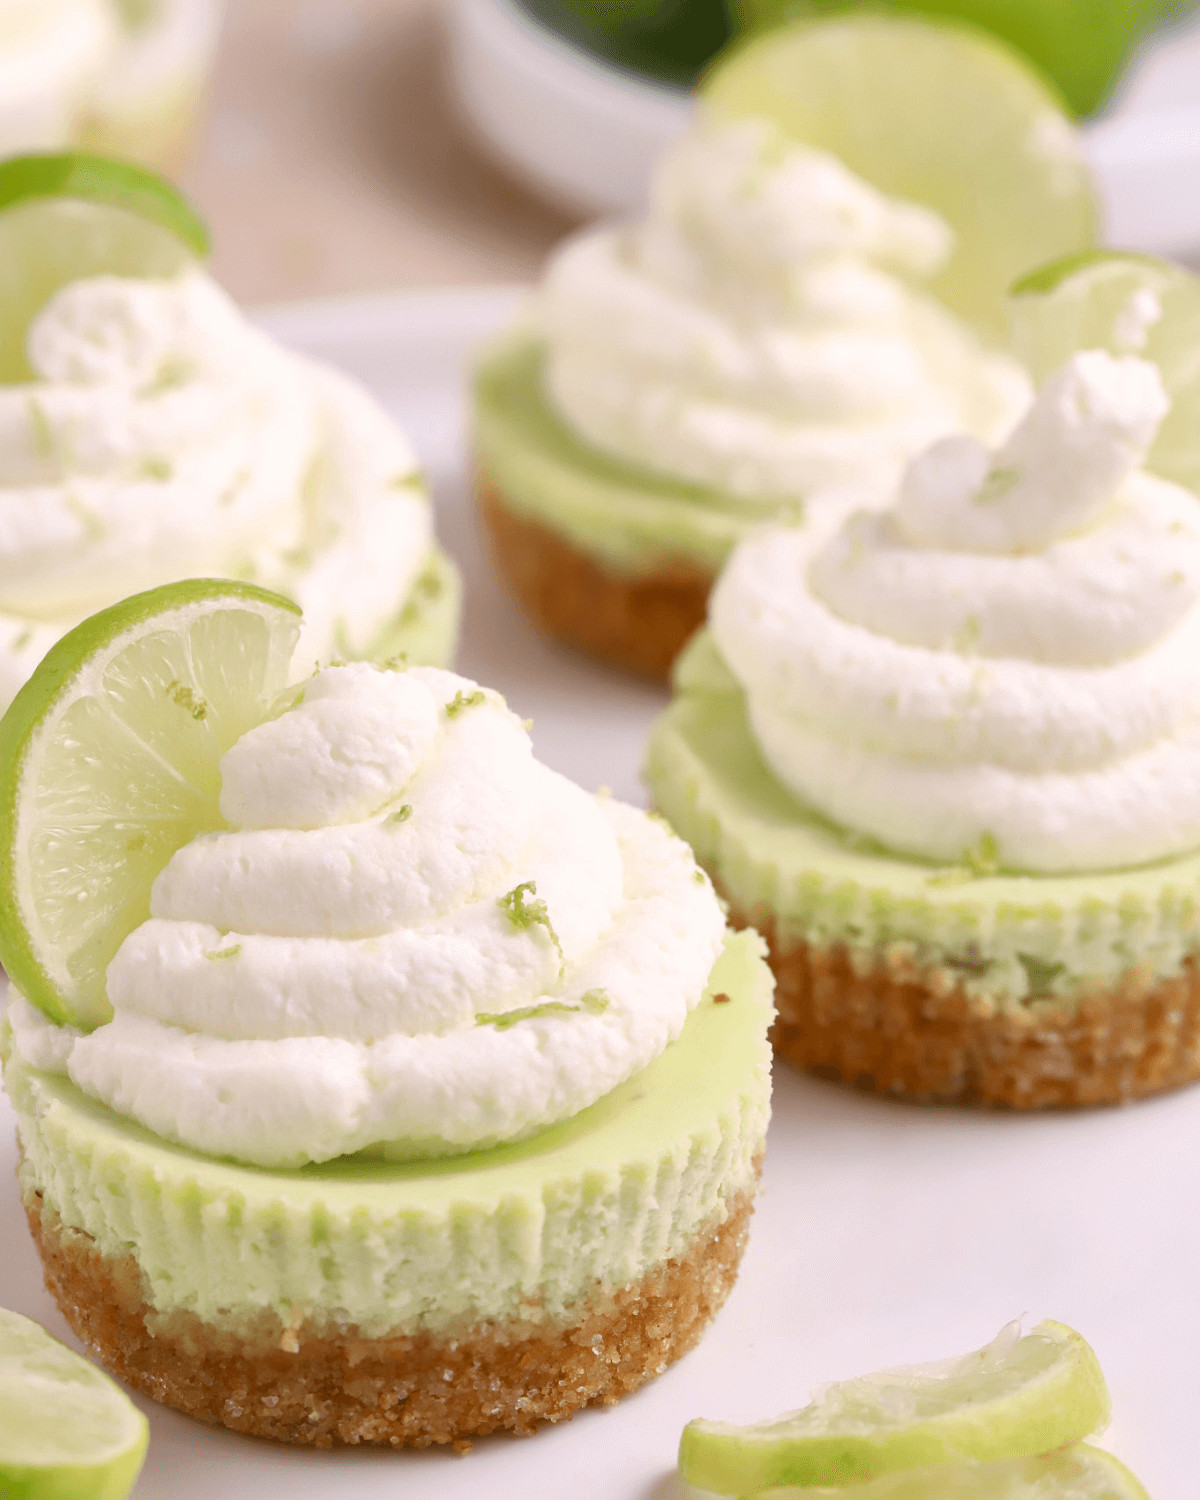 Slices of lime on top of the finished treats.